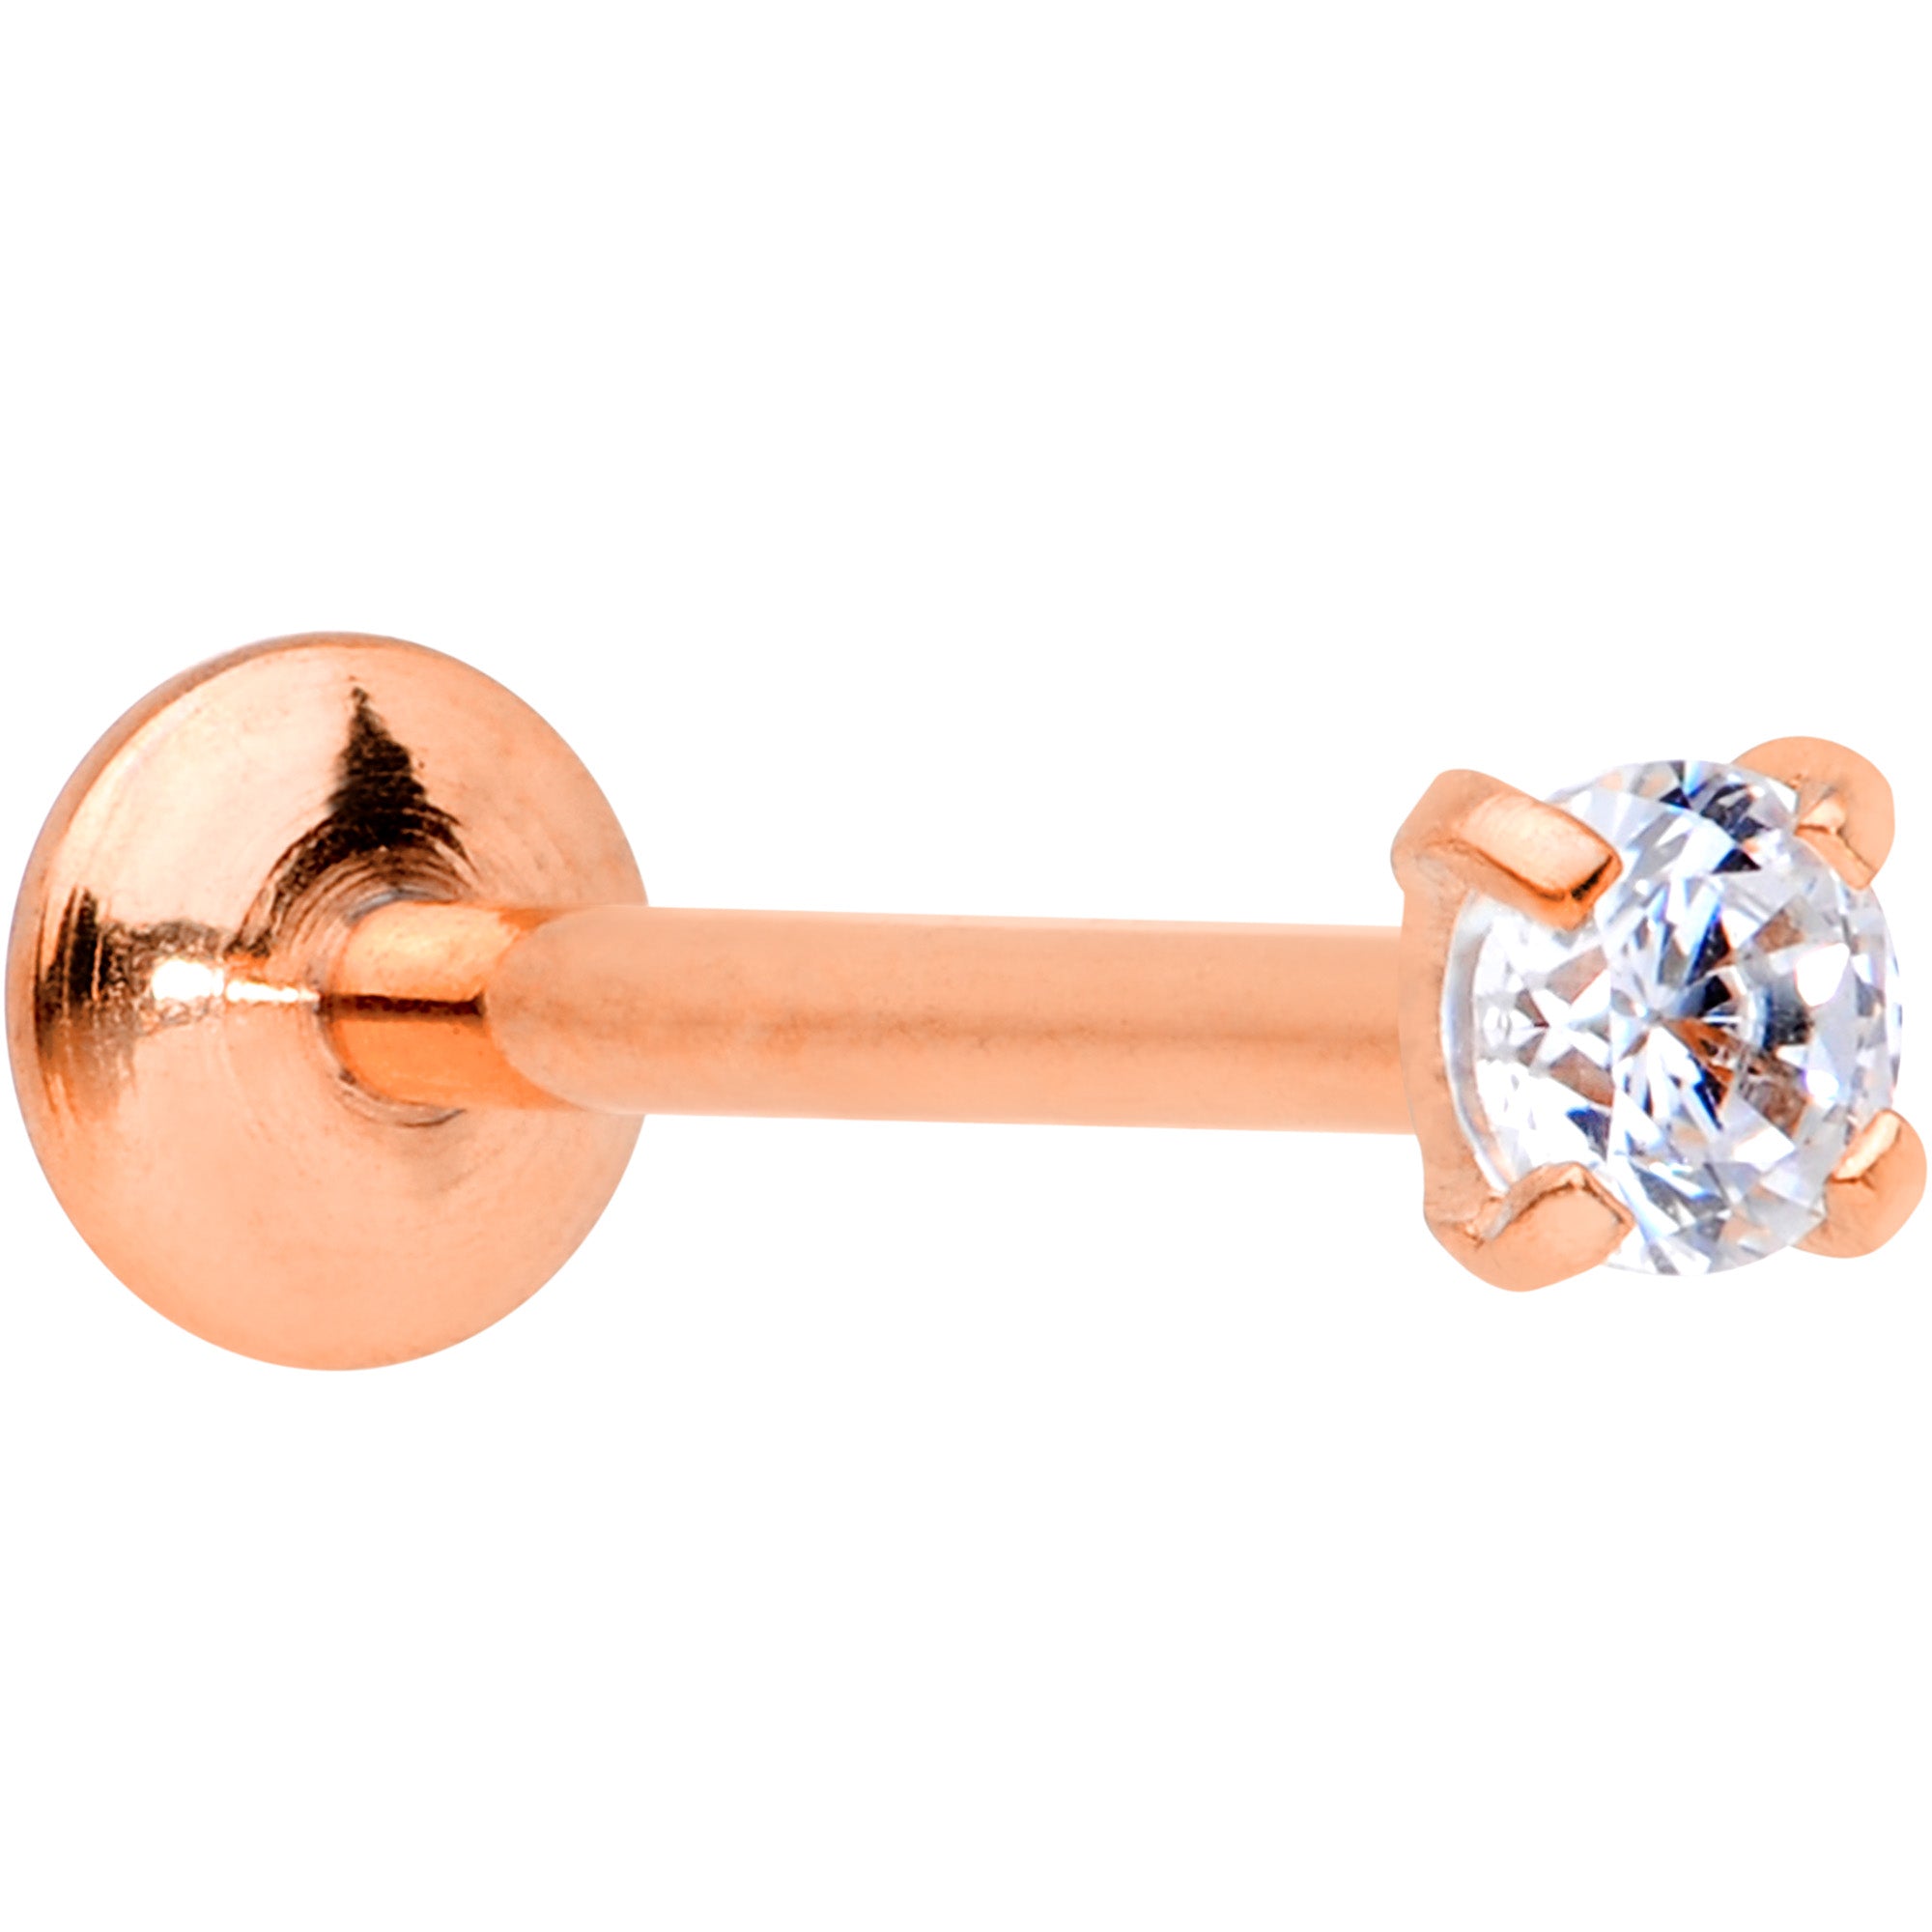 Rose Gold Tone Bolt Style Clip on Non Pierced Nipple Ring Set